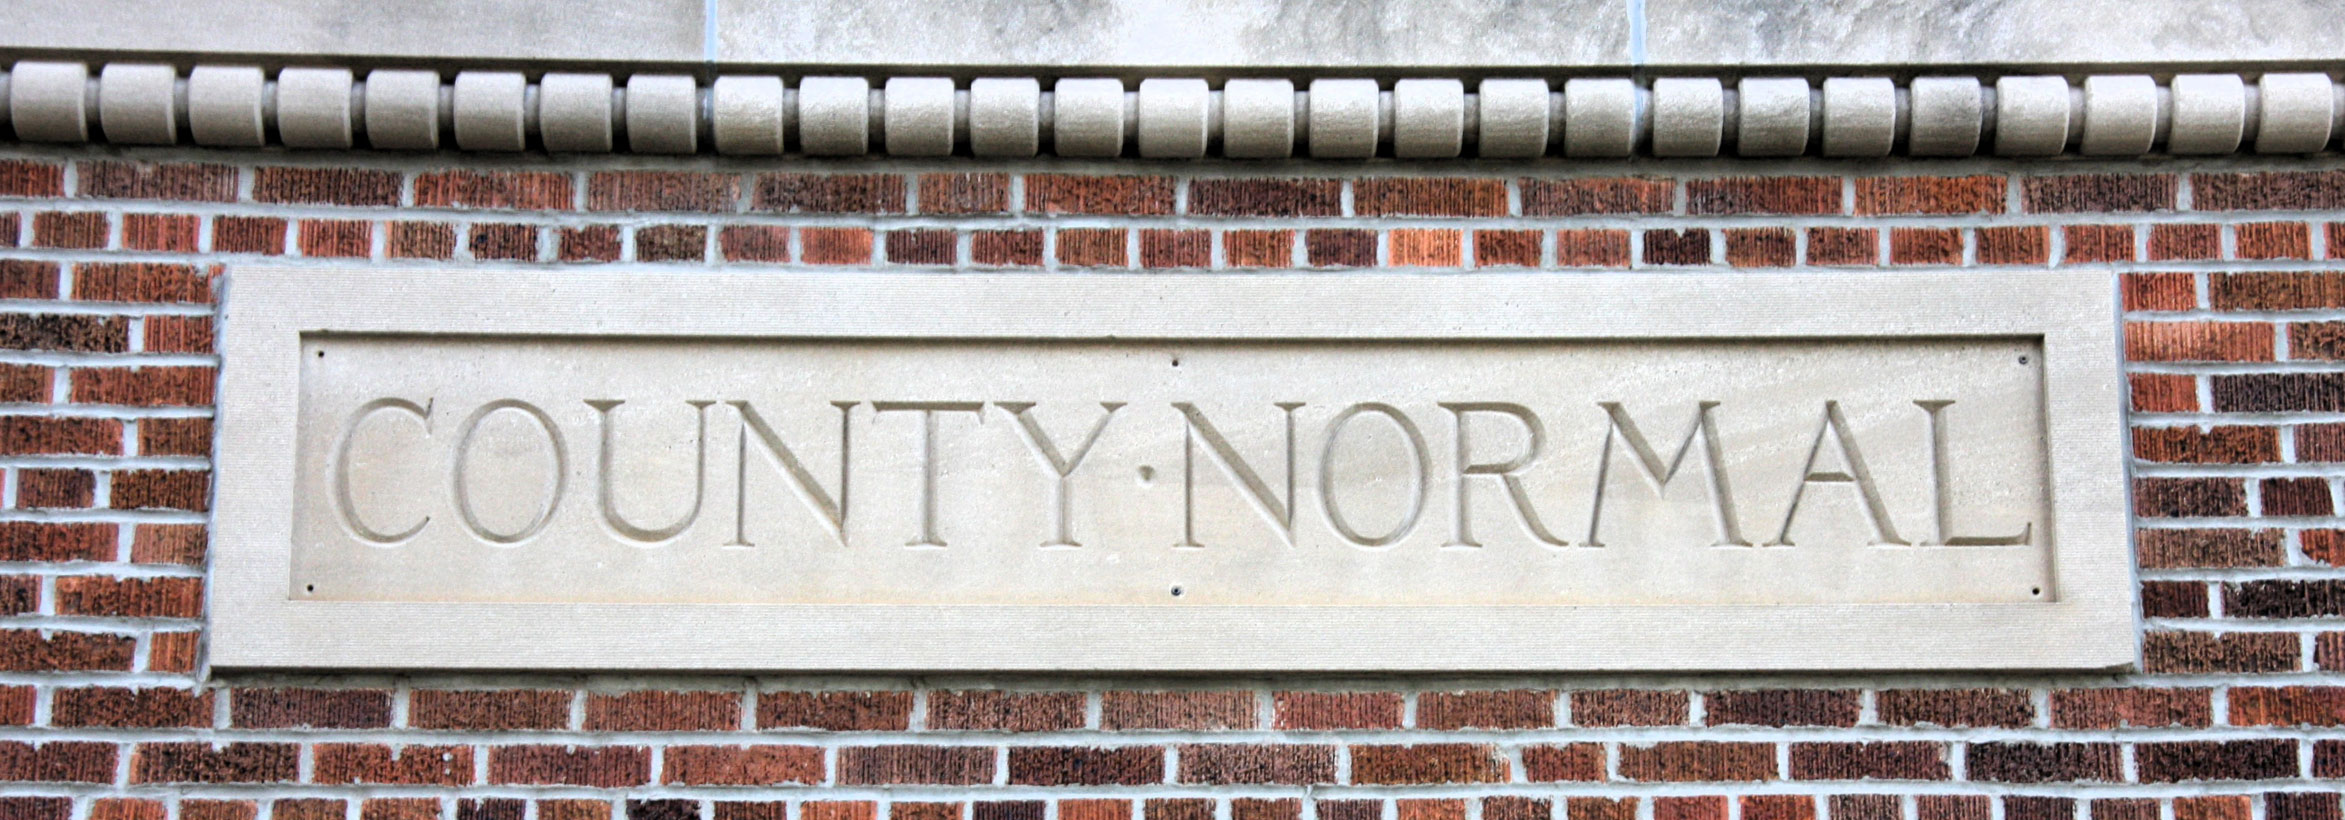 ‘County Normal’ carved in stone